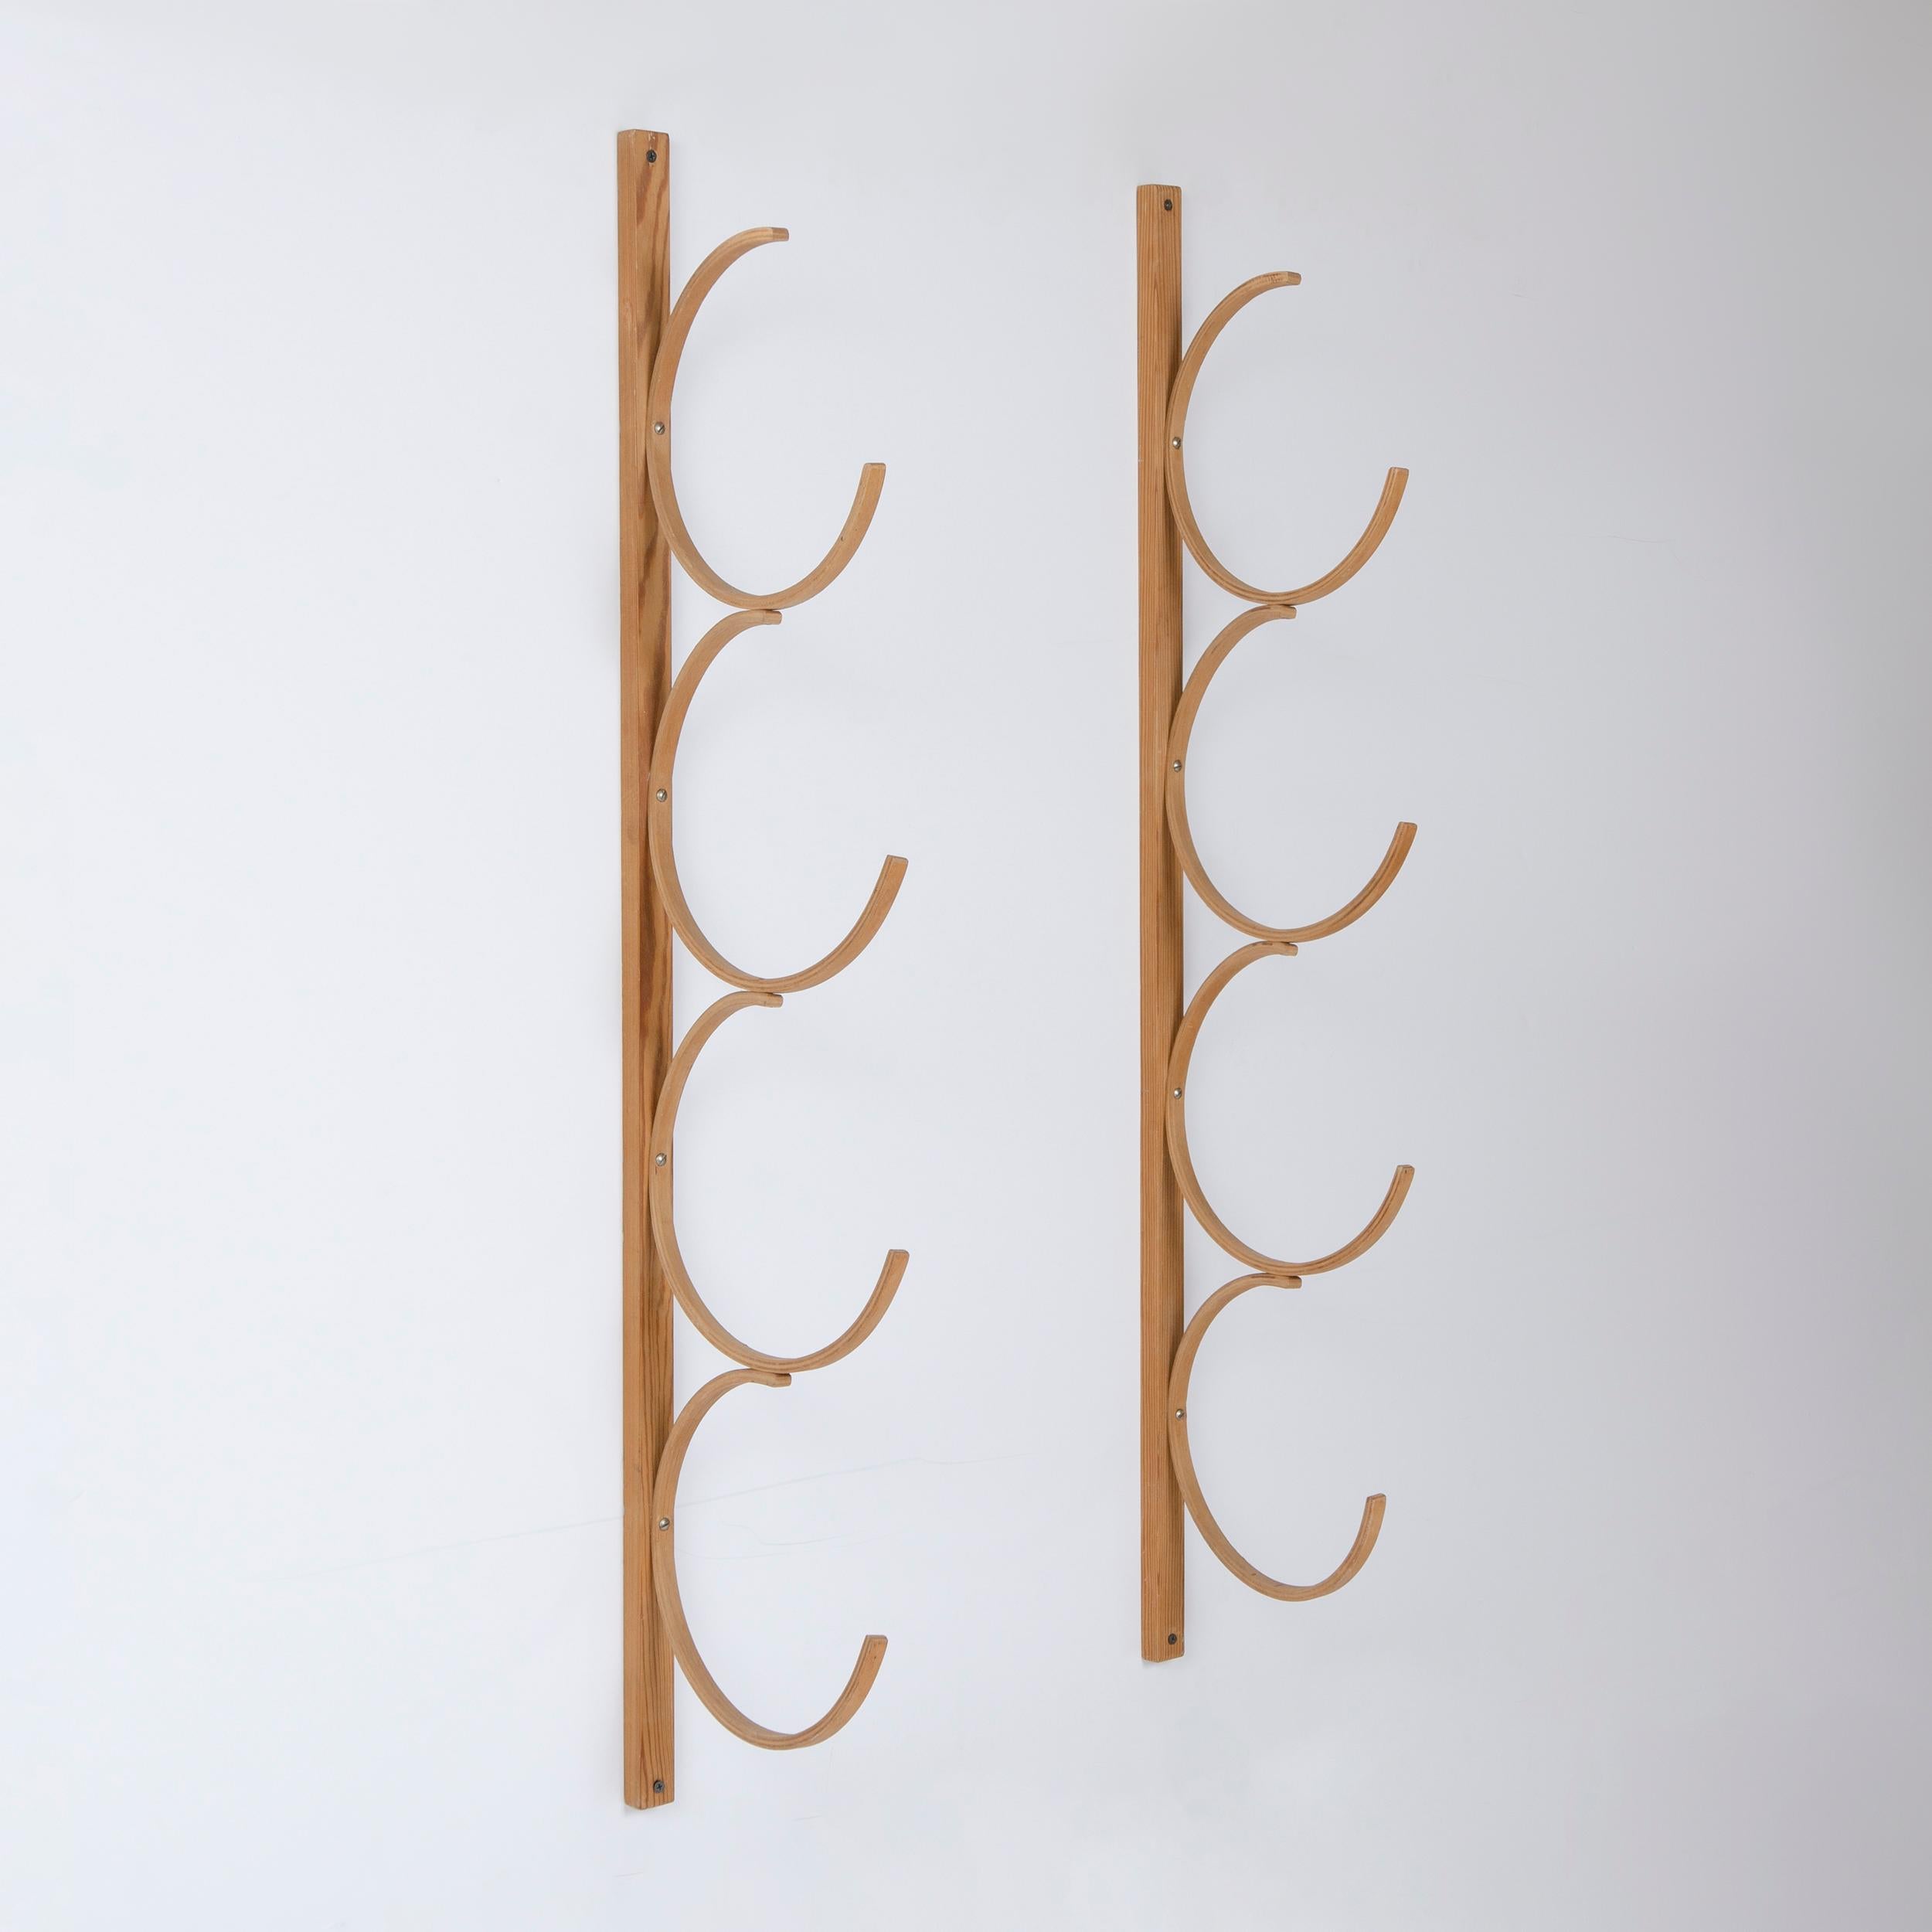 An uncommon birch bentwood drawing rack with four pairs of hooks.